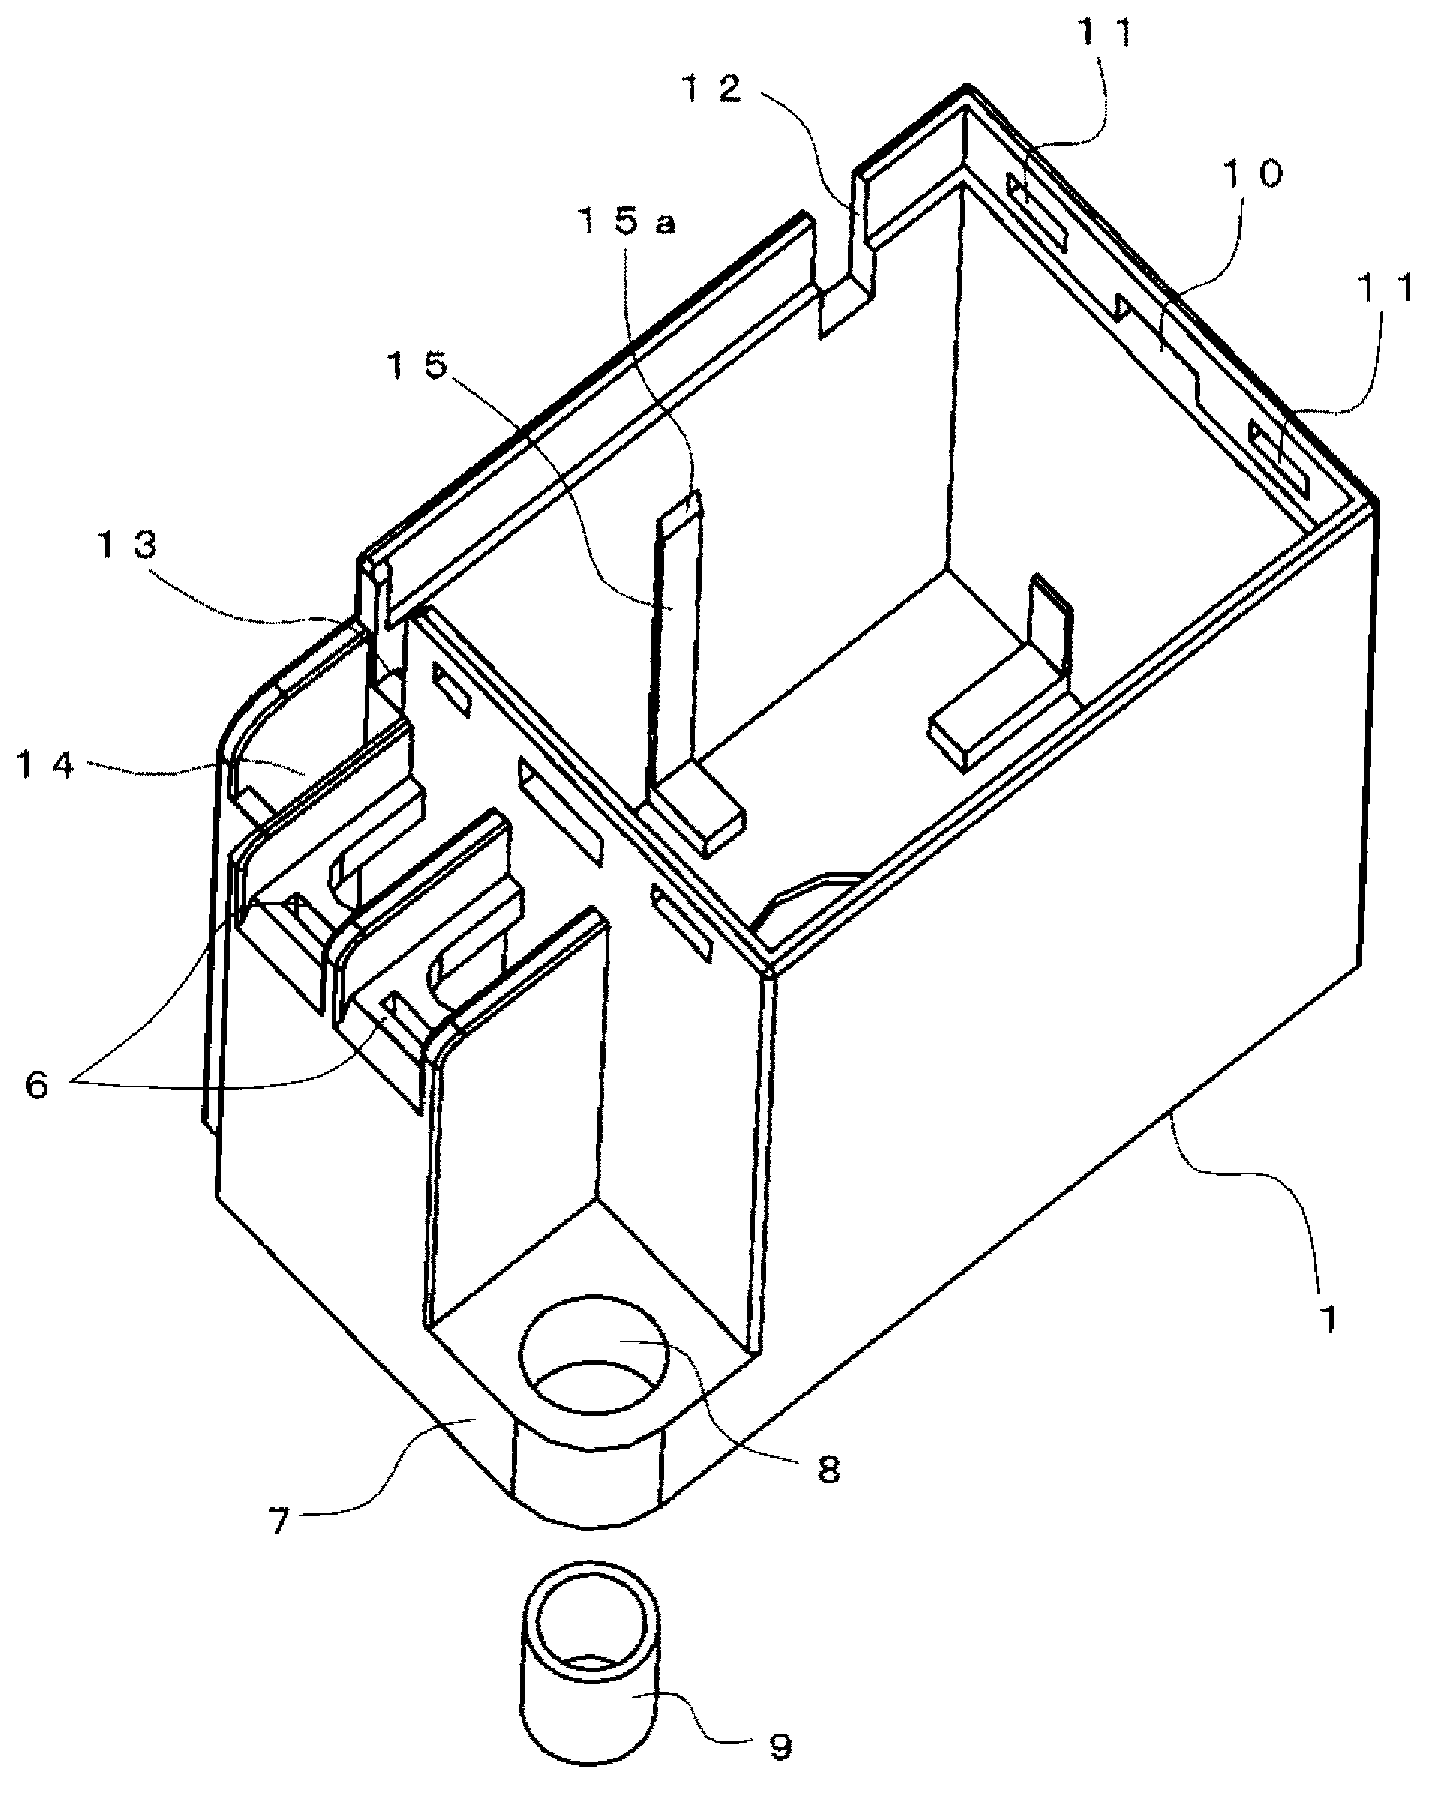 Electromagnetic relay and reed switch attachment structure